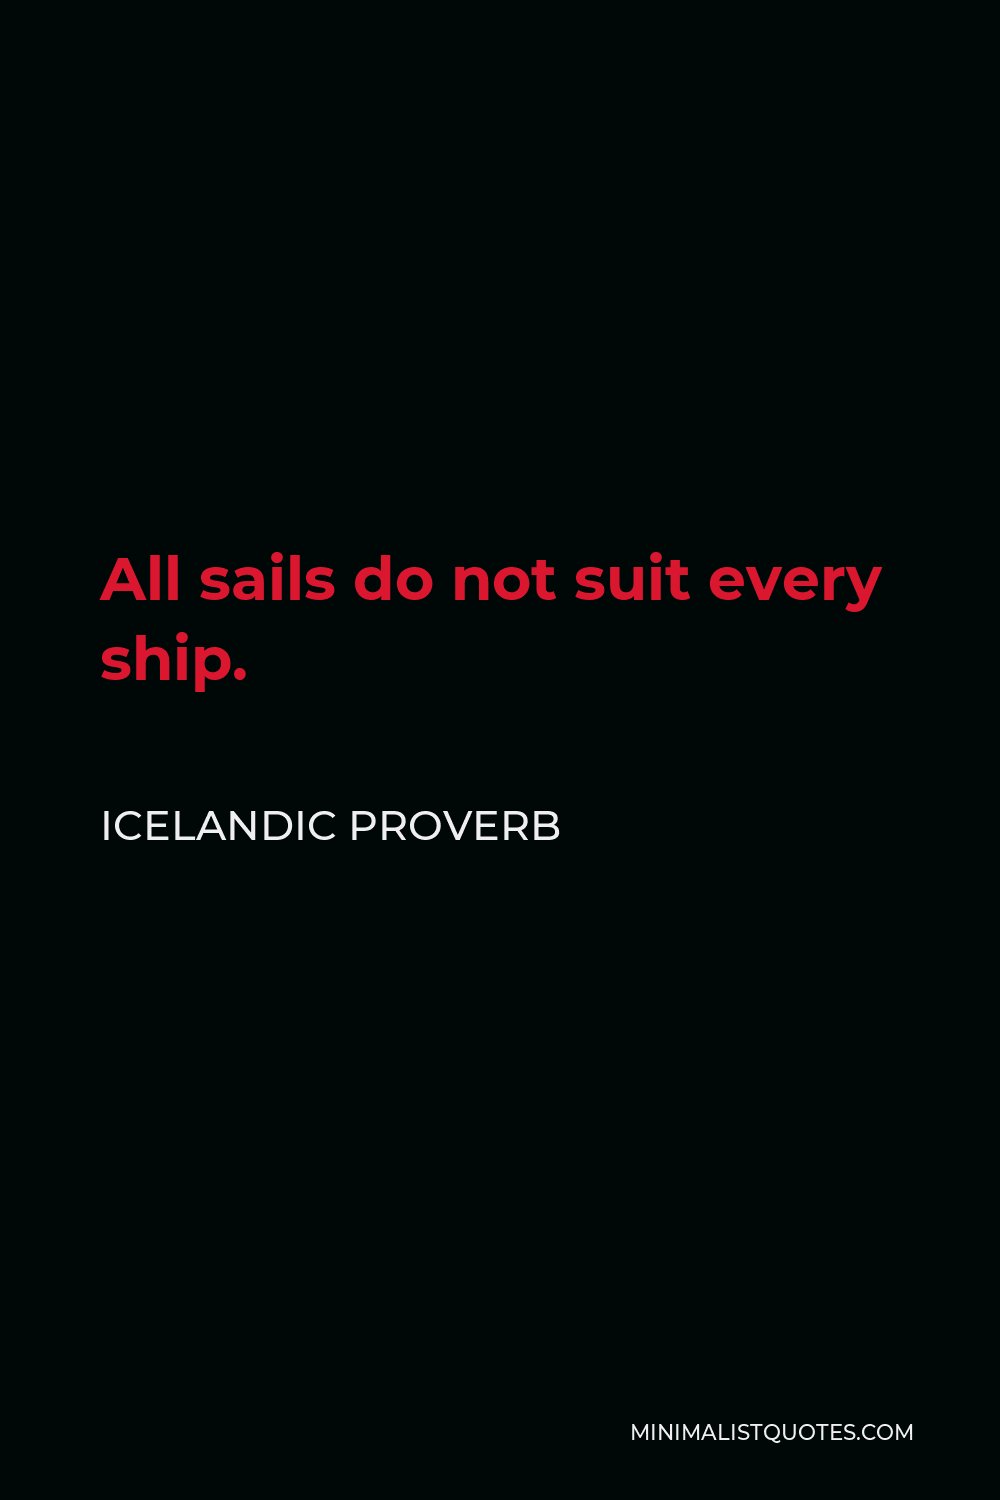 Icelandic Proverb Quote - All sails do not suit every ship.